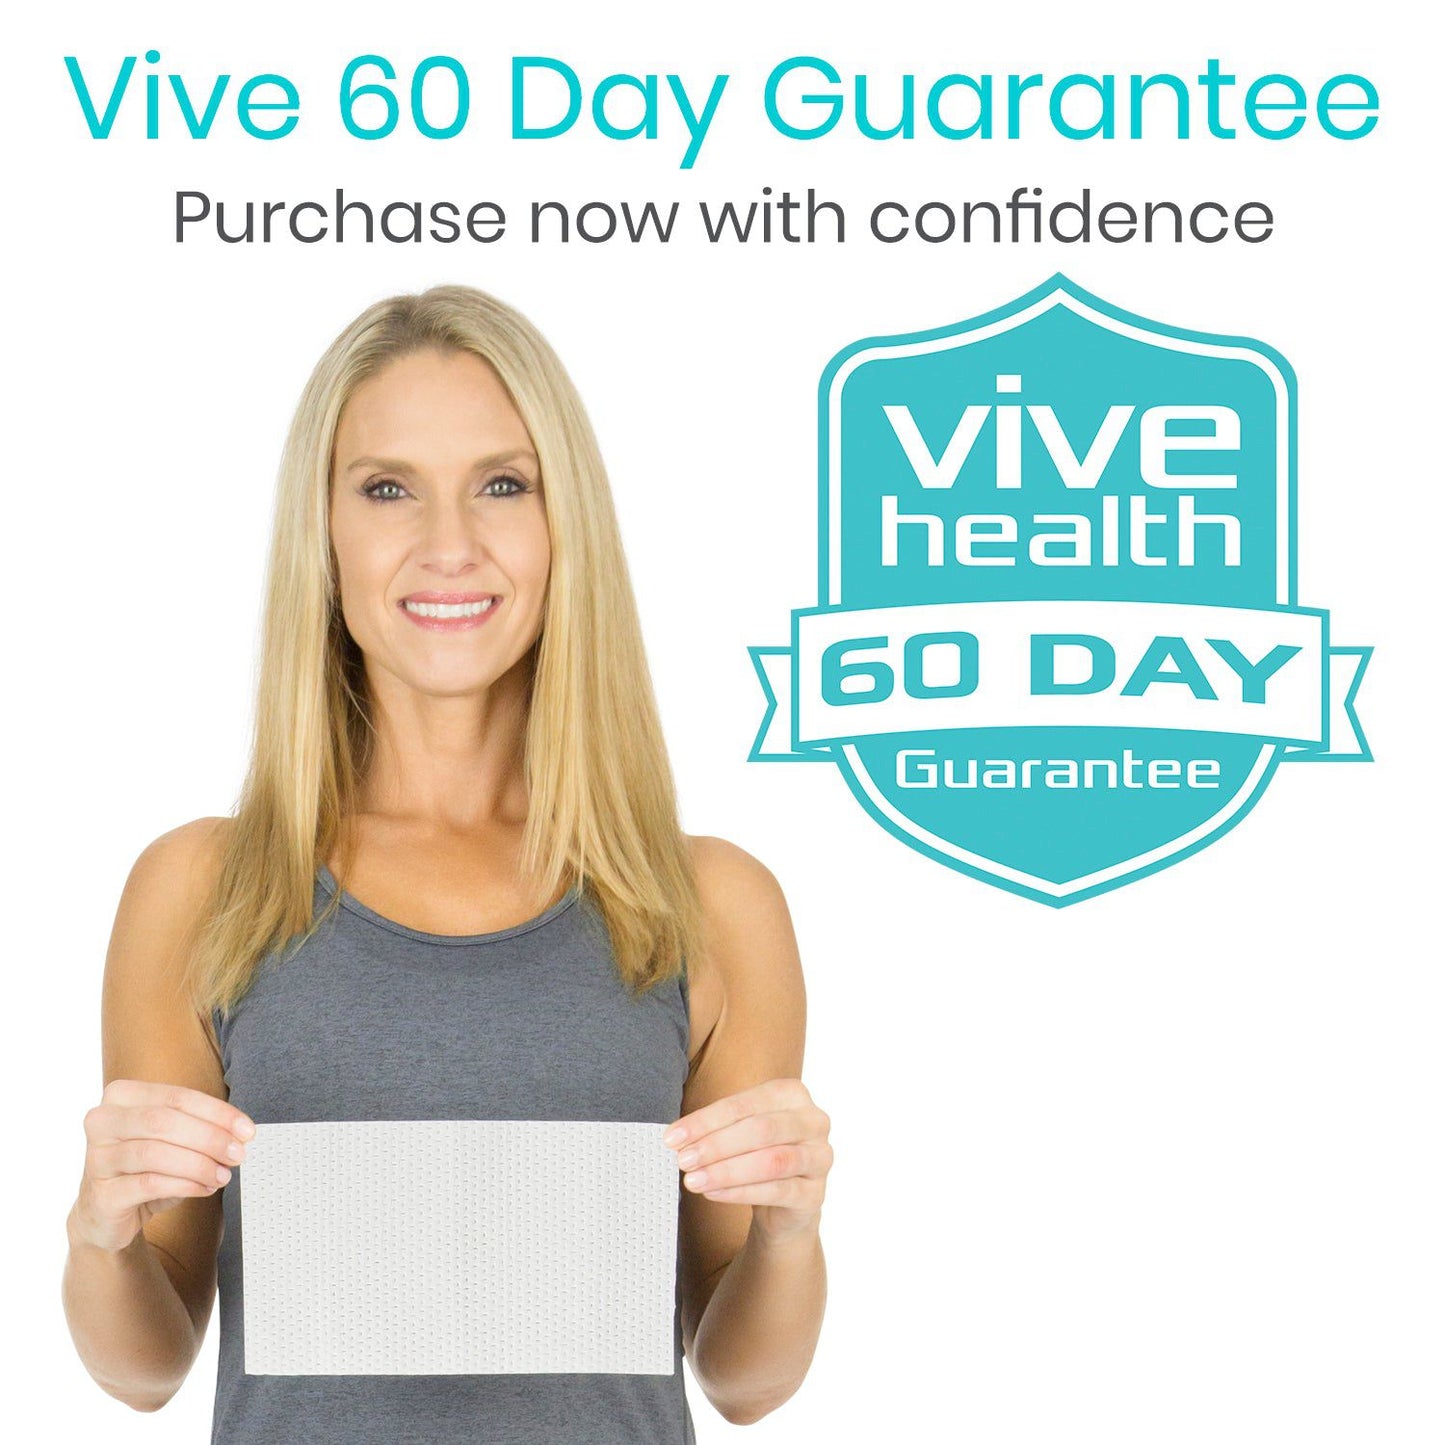 Vive Health Commode Pads 24 pack (No Liners)